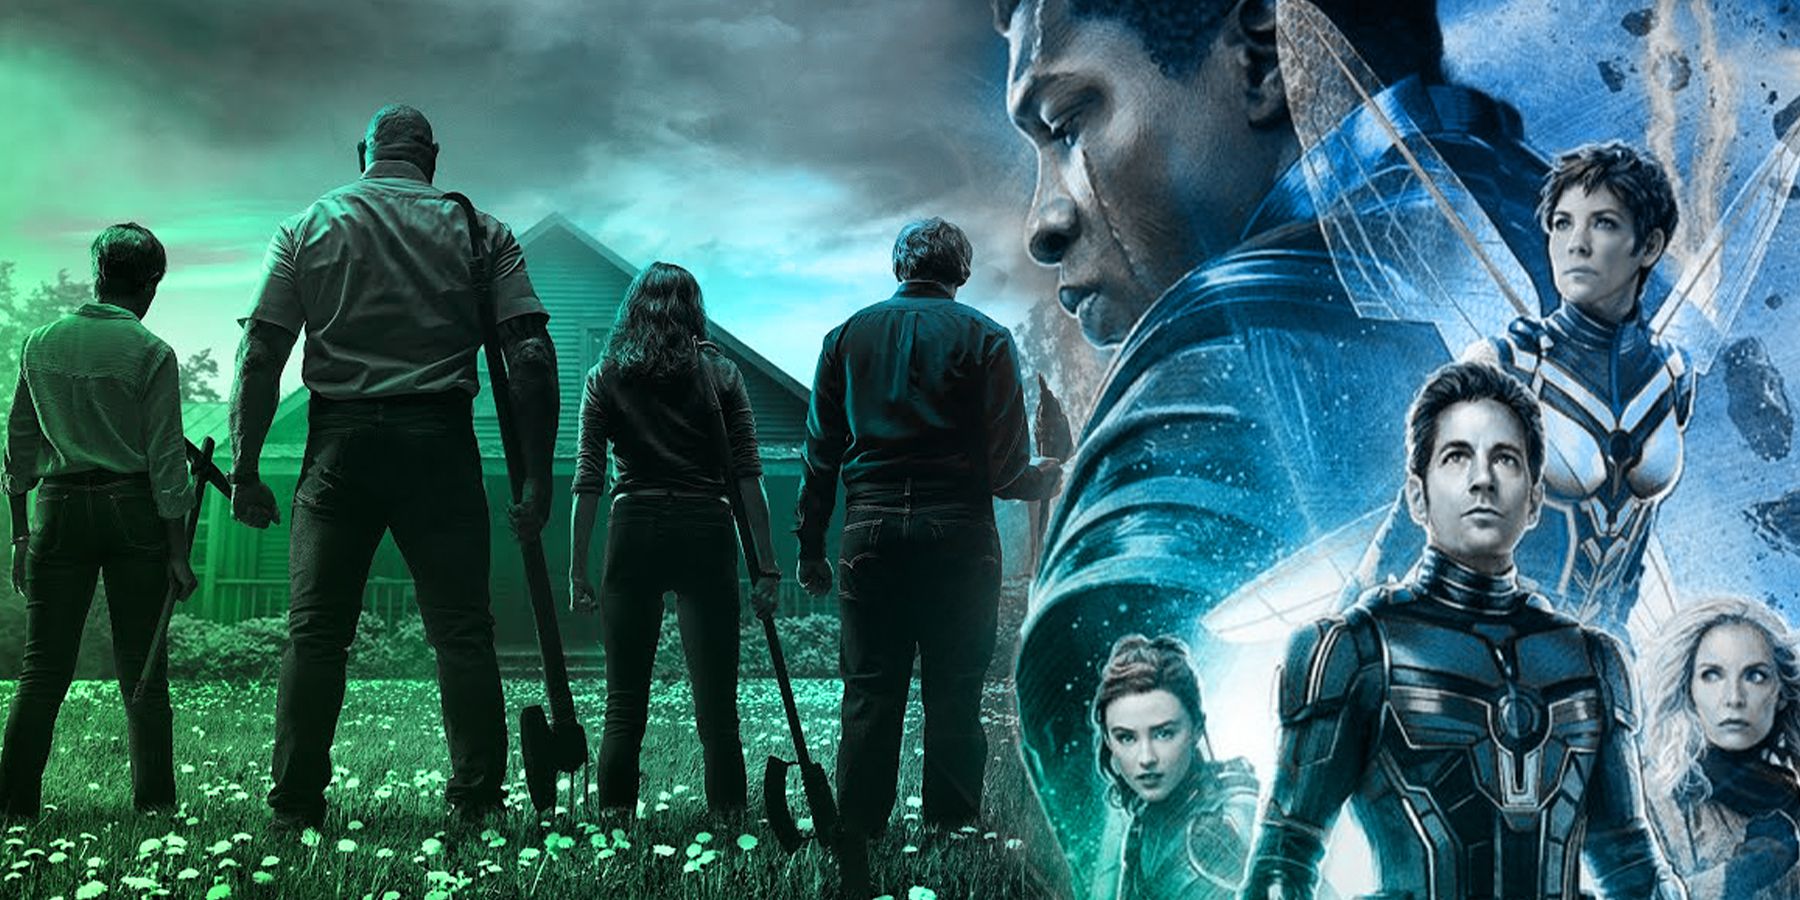 New Sci-FiFantasy Movies to Watch in February 2023